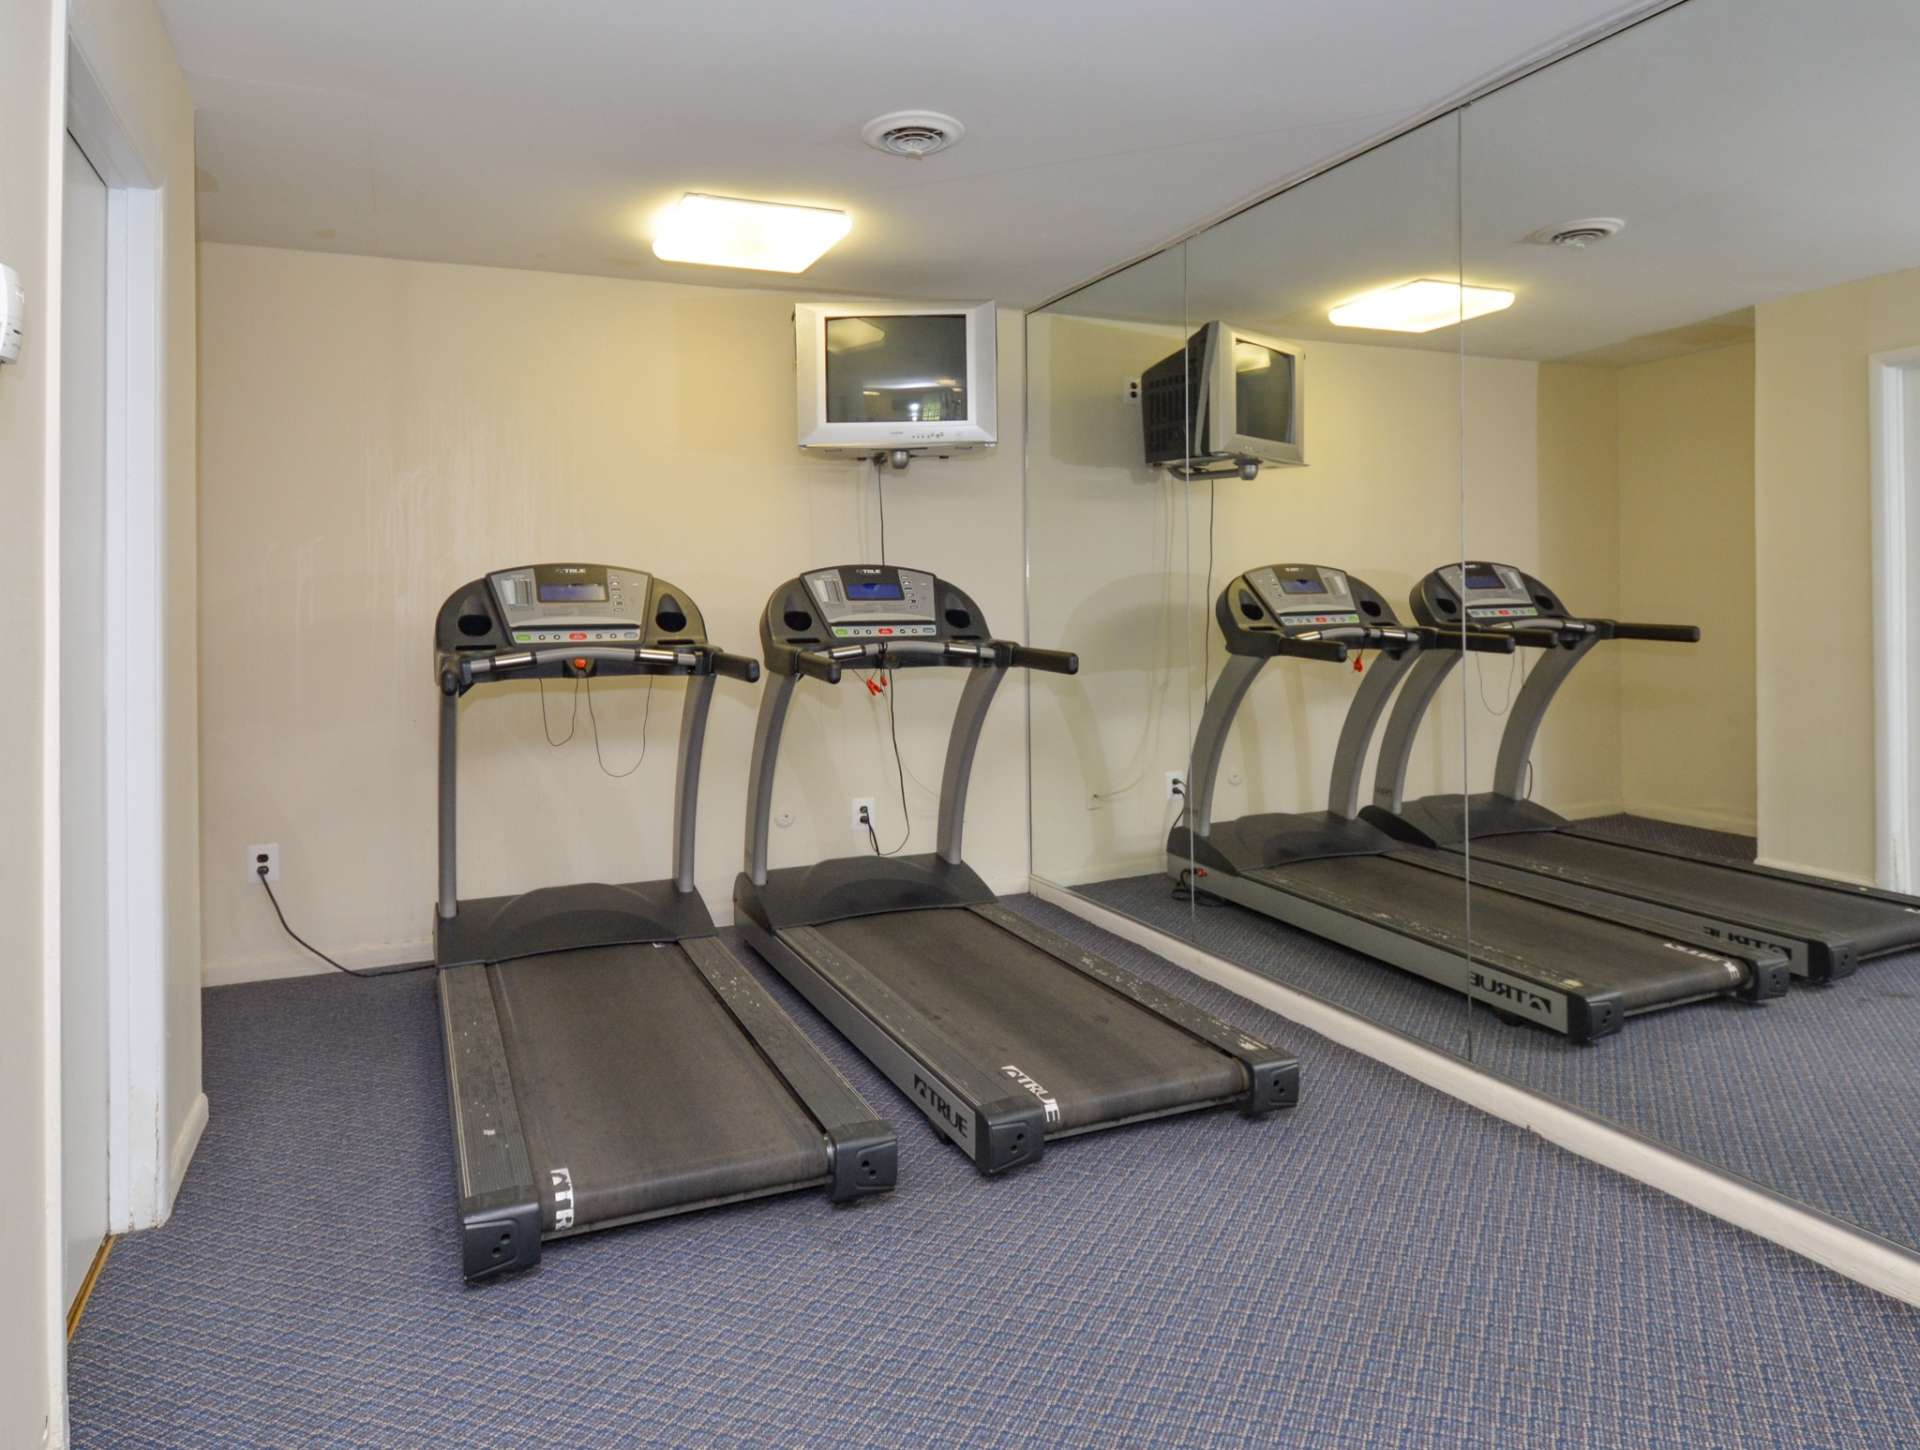 Two treadmills with mirrors on the side wall and a hanging TV at an indoor gym at Glen Eagle Village apartments.